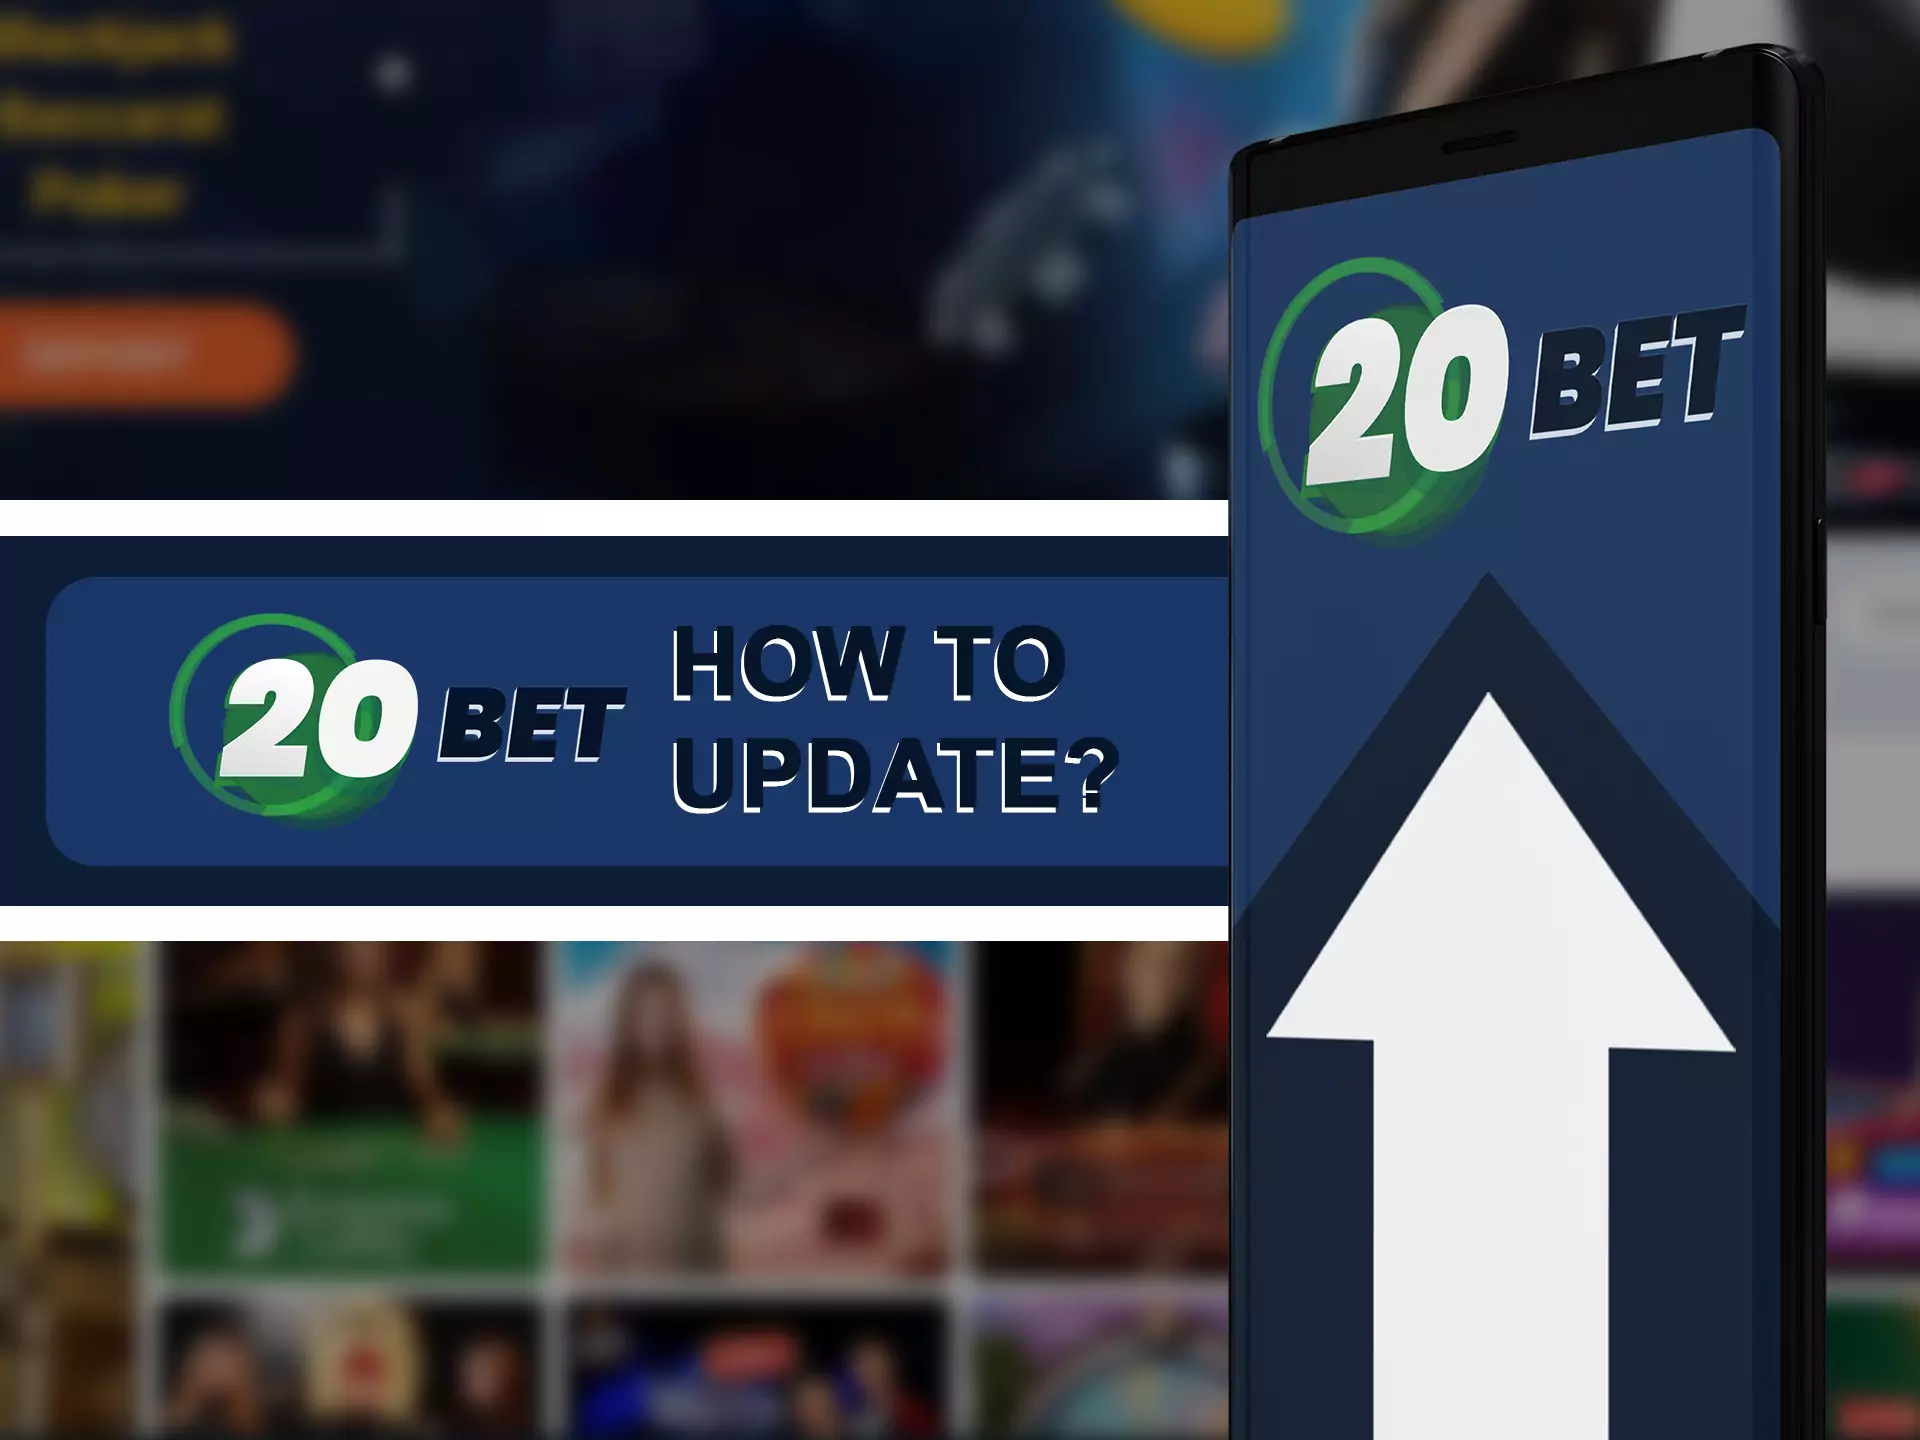 Updates to the 20bet app installed automatically.